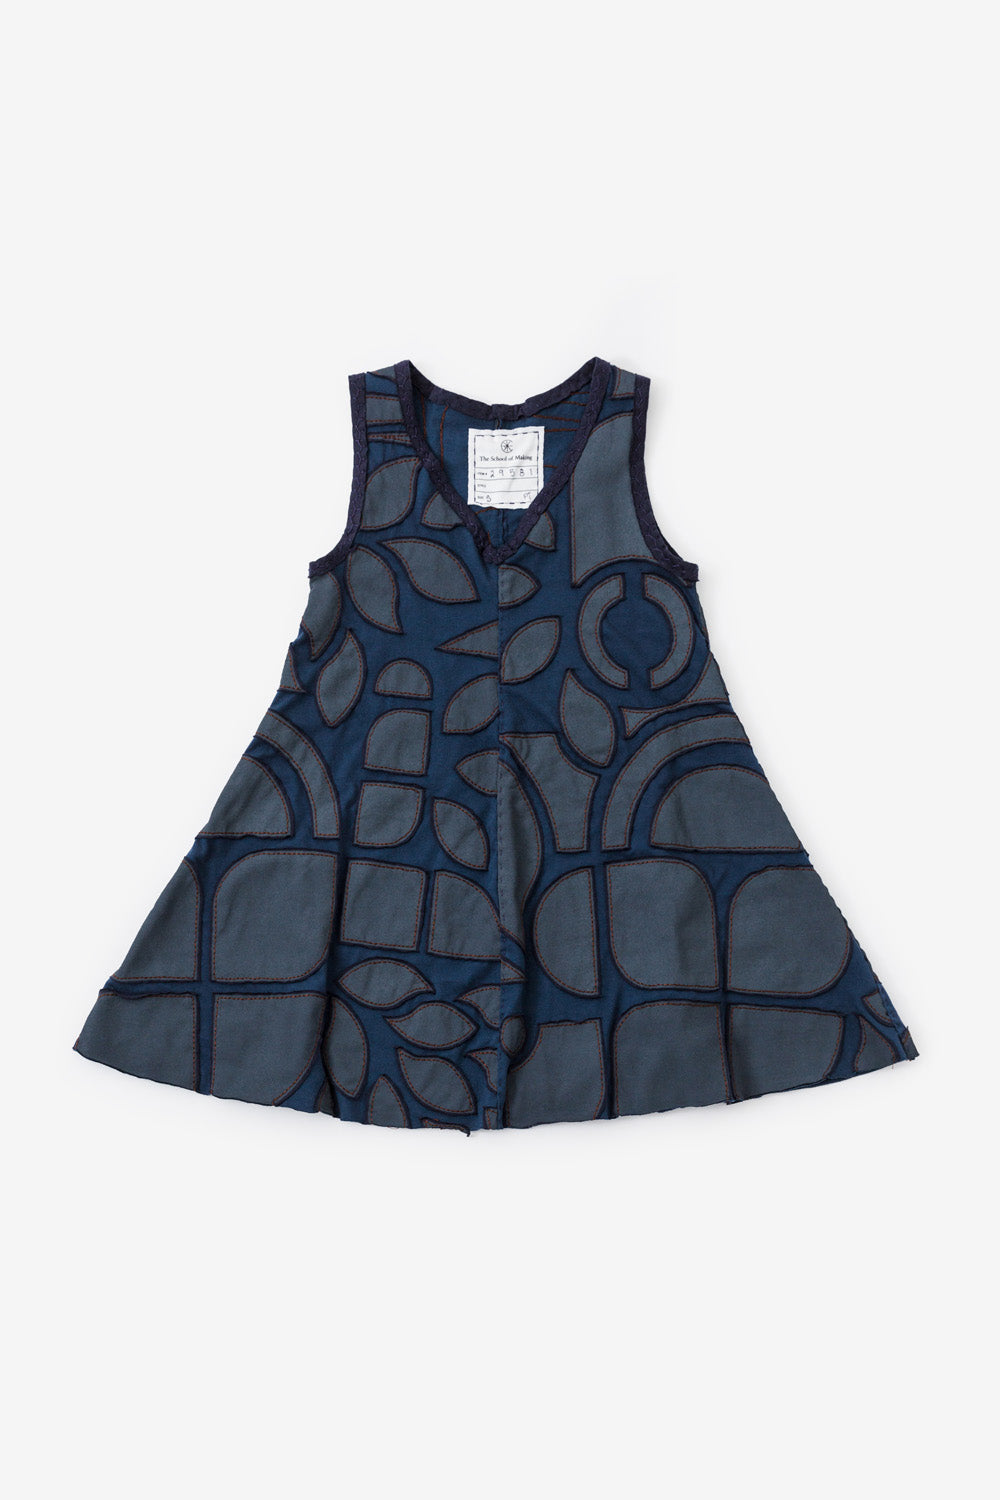 The School of Making A-Line Top and Tunic Kit Sleeveless in Blue